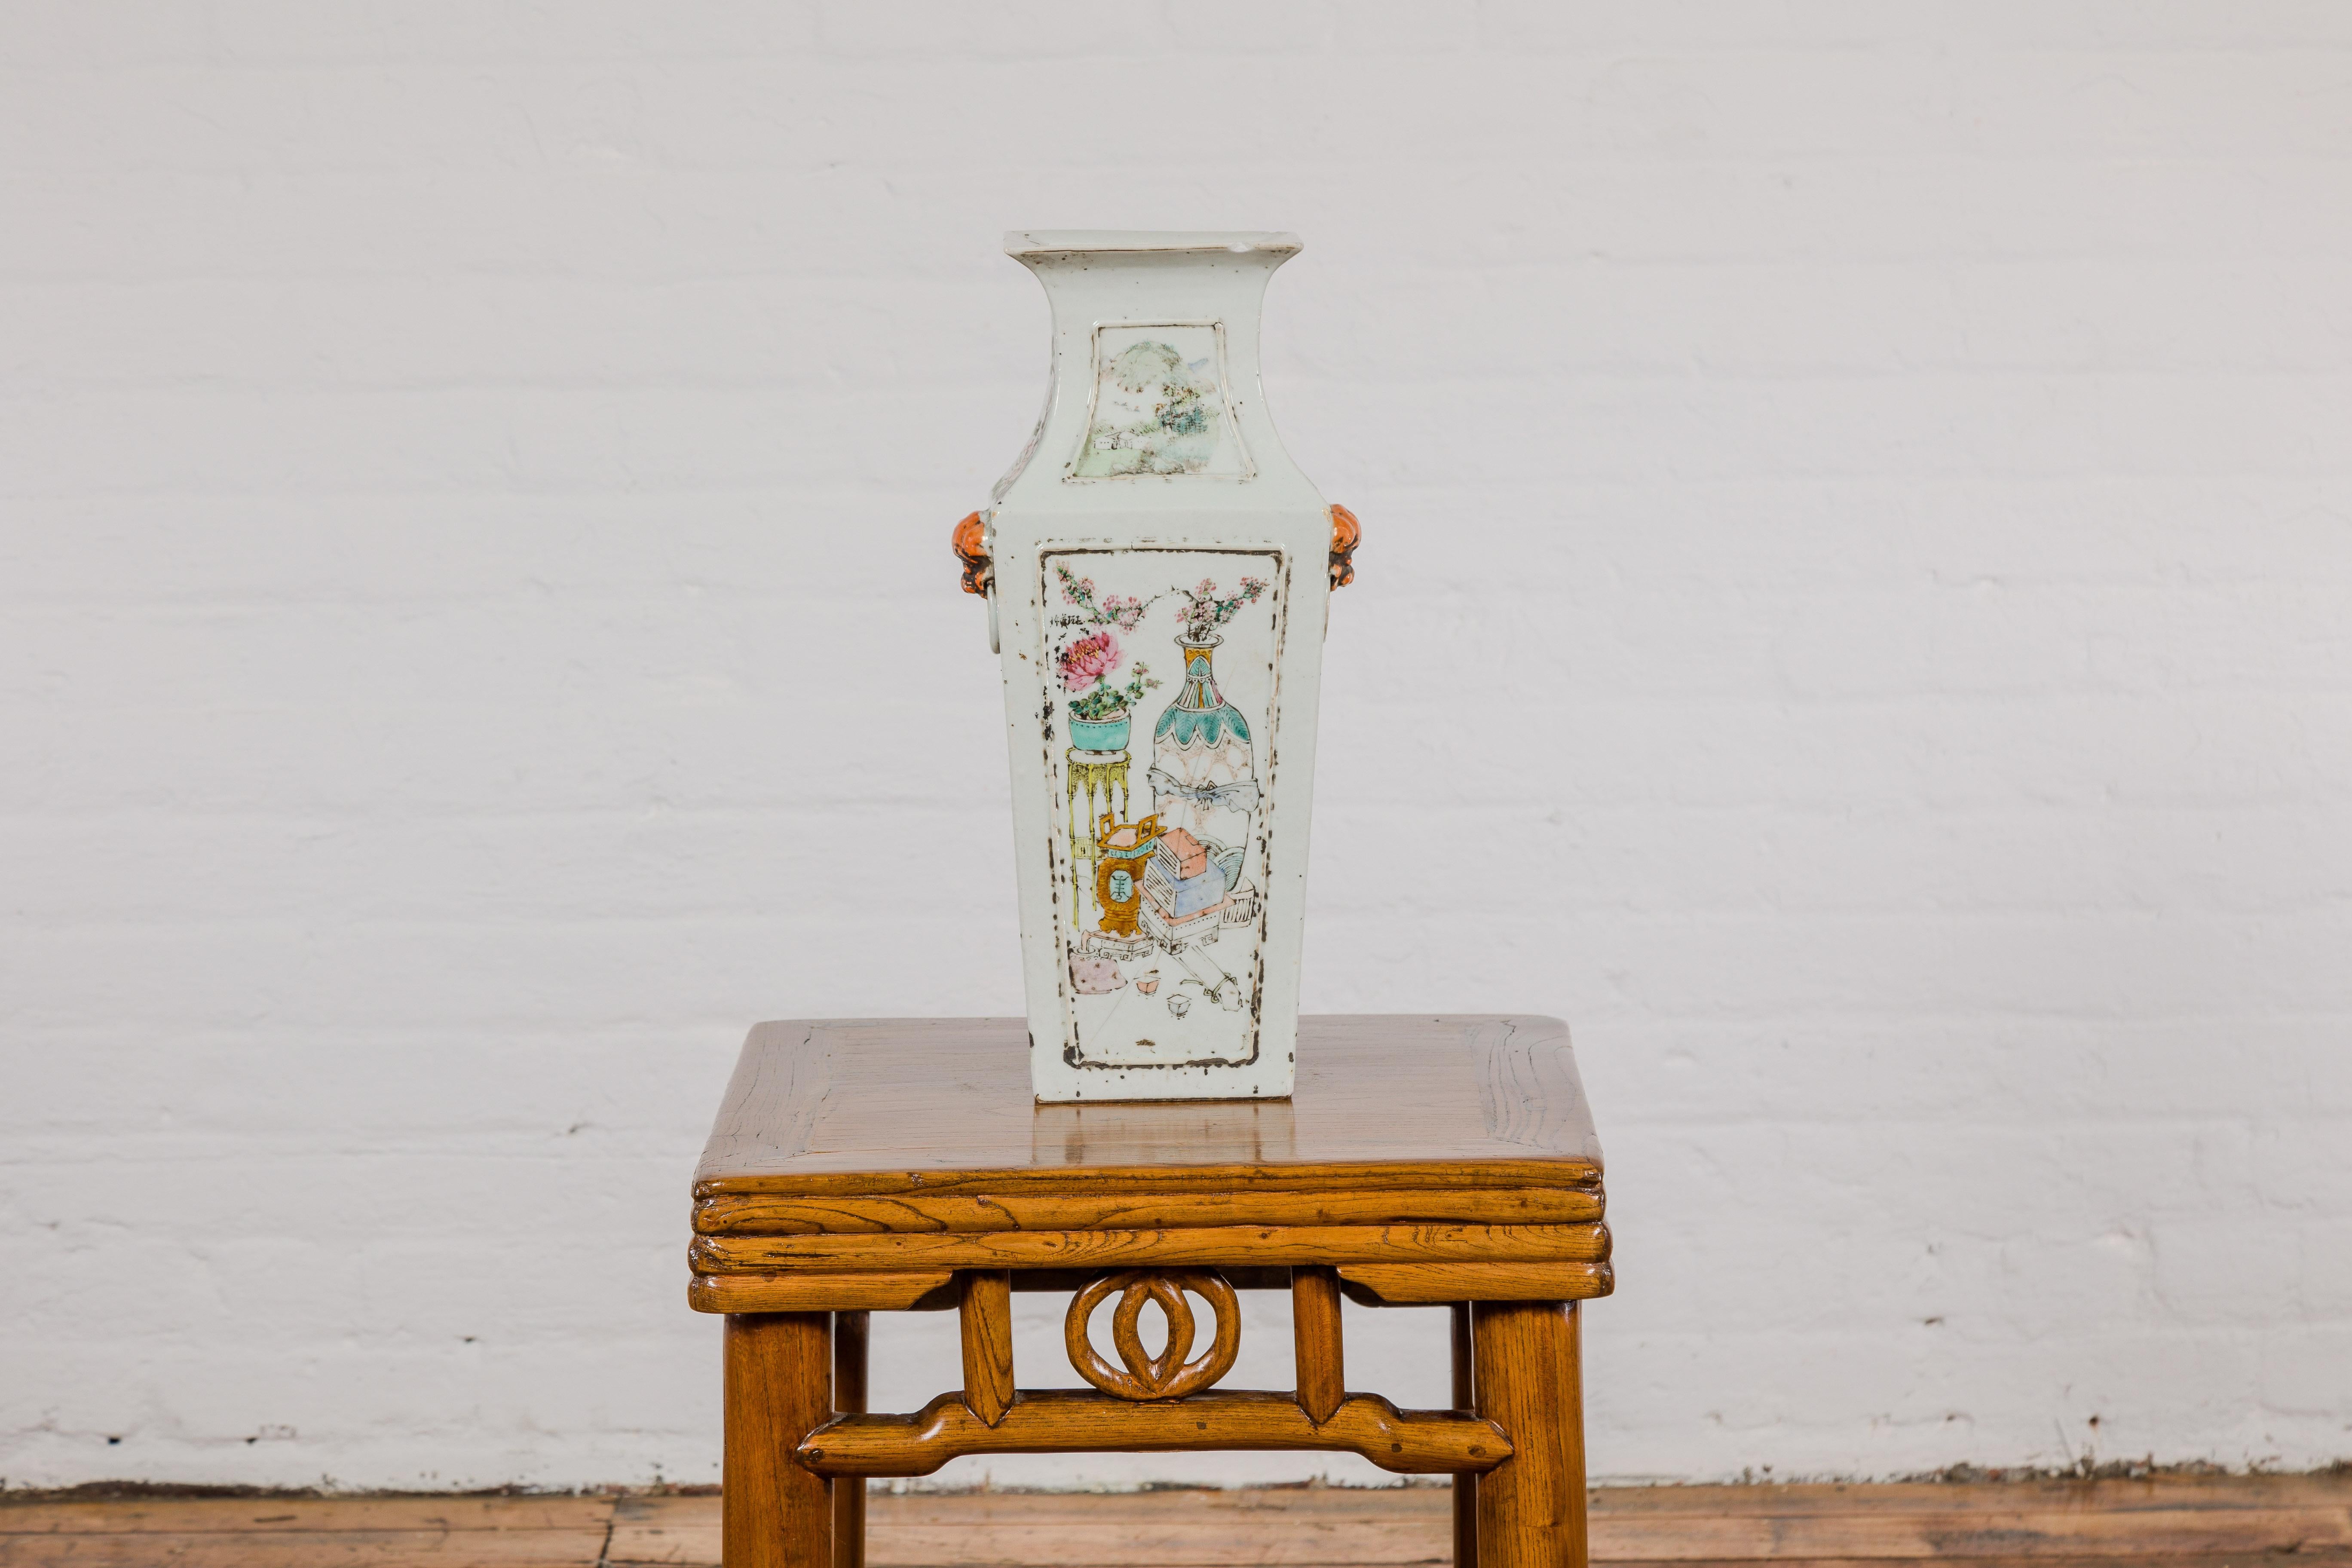 A Chinese Qing Dynasty period white porcelain vase with painted flowers, objects and calligraphy. This exquisite Chinese Qing Dynasty period white porcelain vase is a remarkable specimen of the era's unparalleled porcelain artistry. The vase is